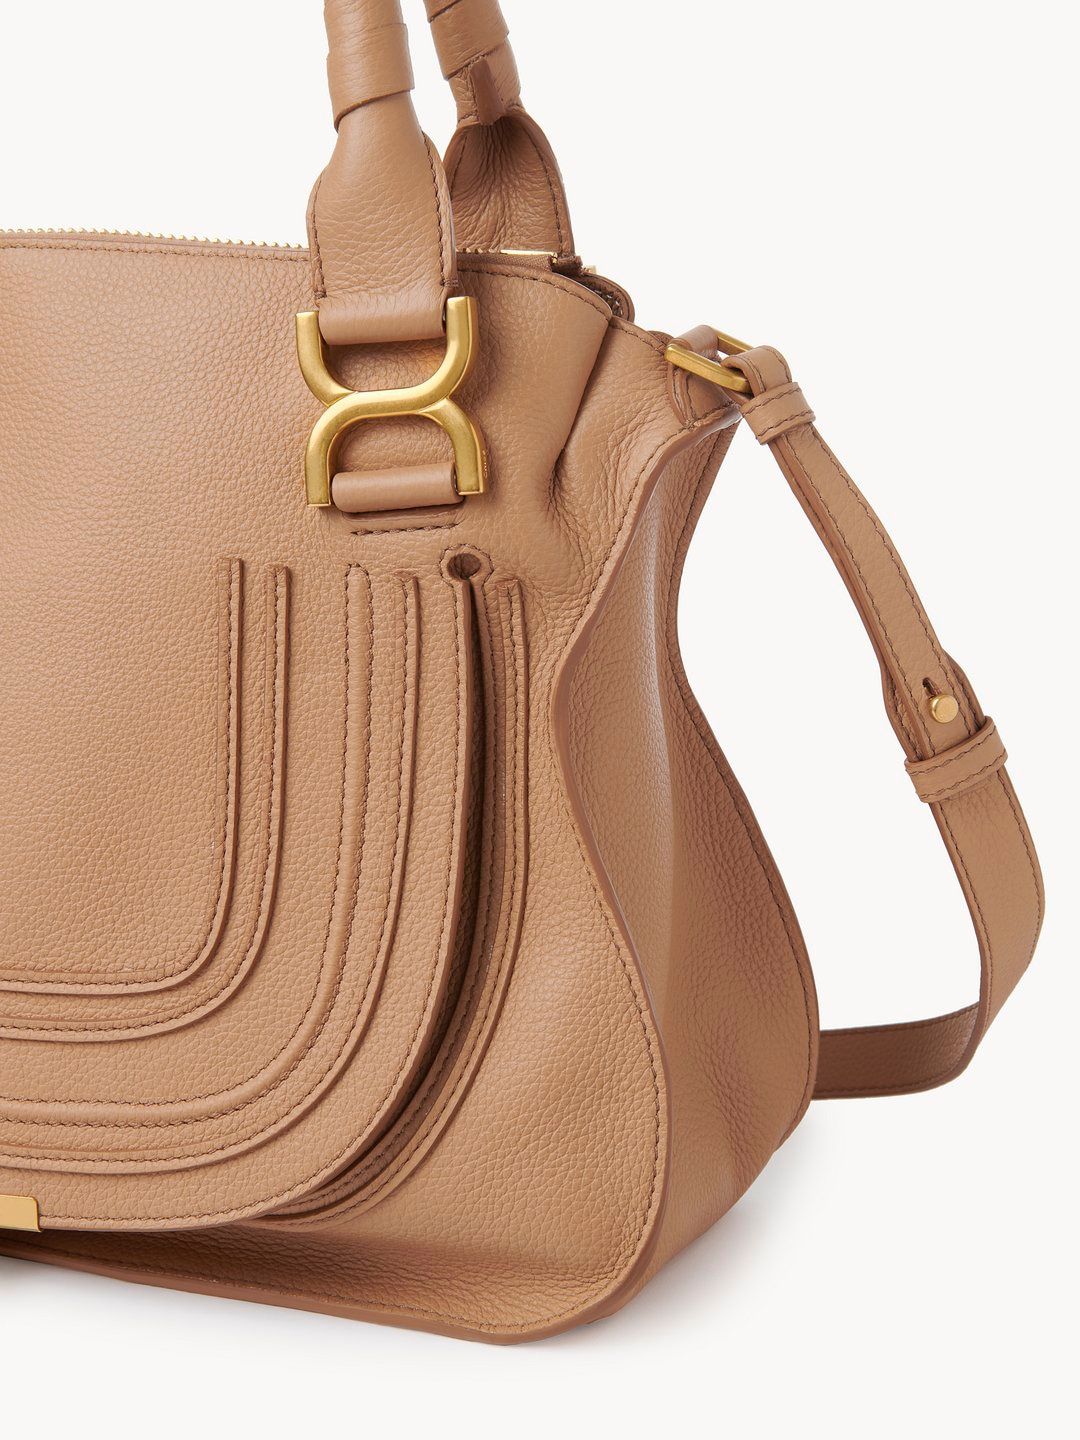 CHLOÉ Light Tan Leather Double Carry Handbag for Women - SS24 Collection